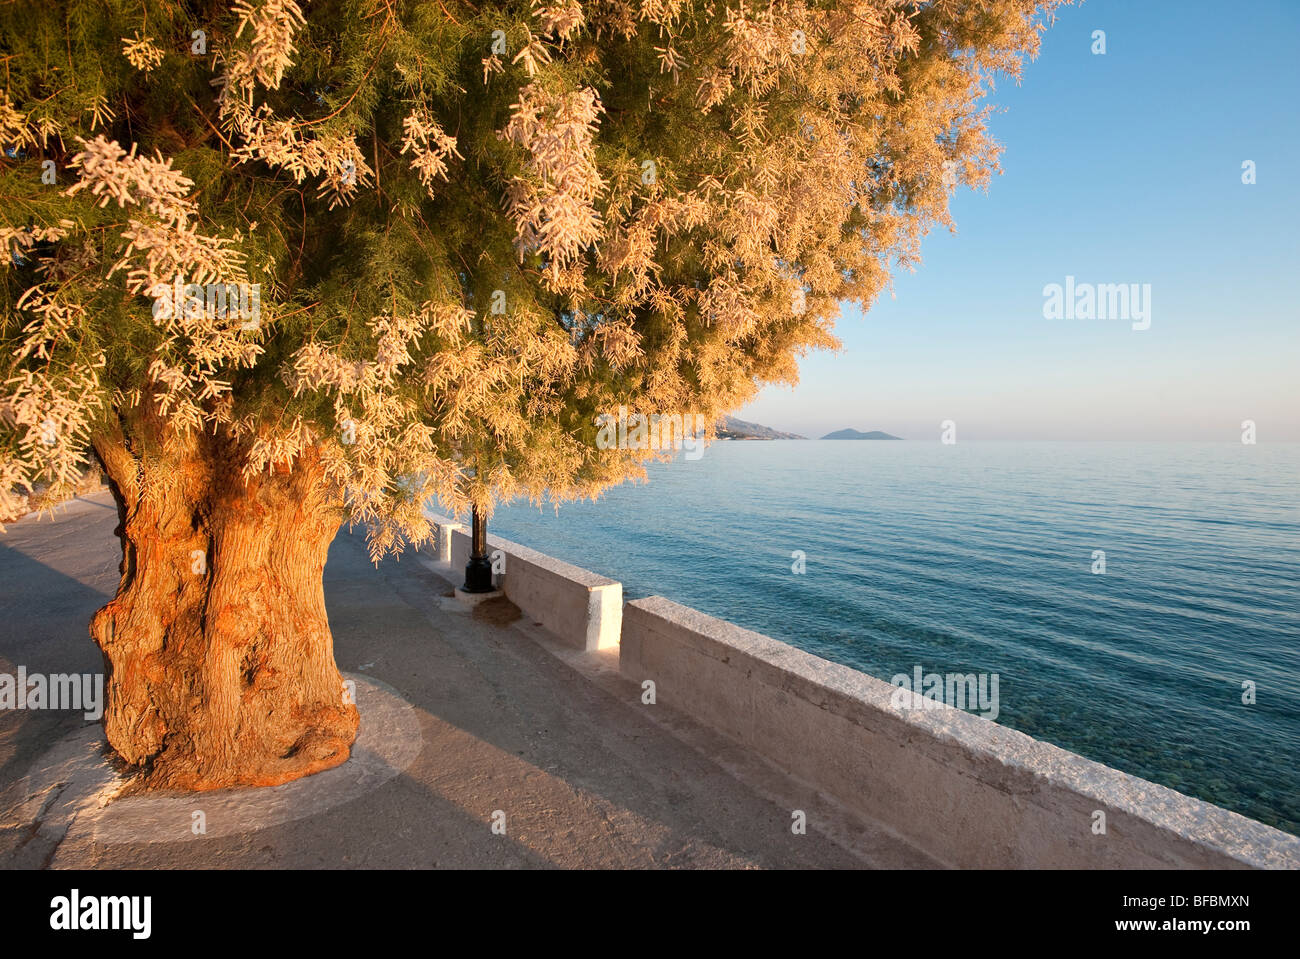 Late afternoon sunlight shoining on a tamarisk tree on a drive along a beach on a greek island Stock Photo